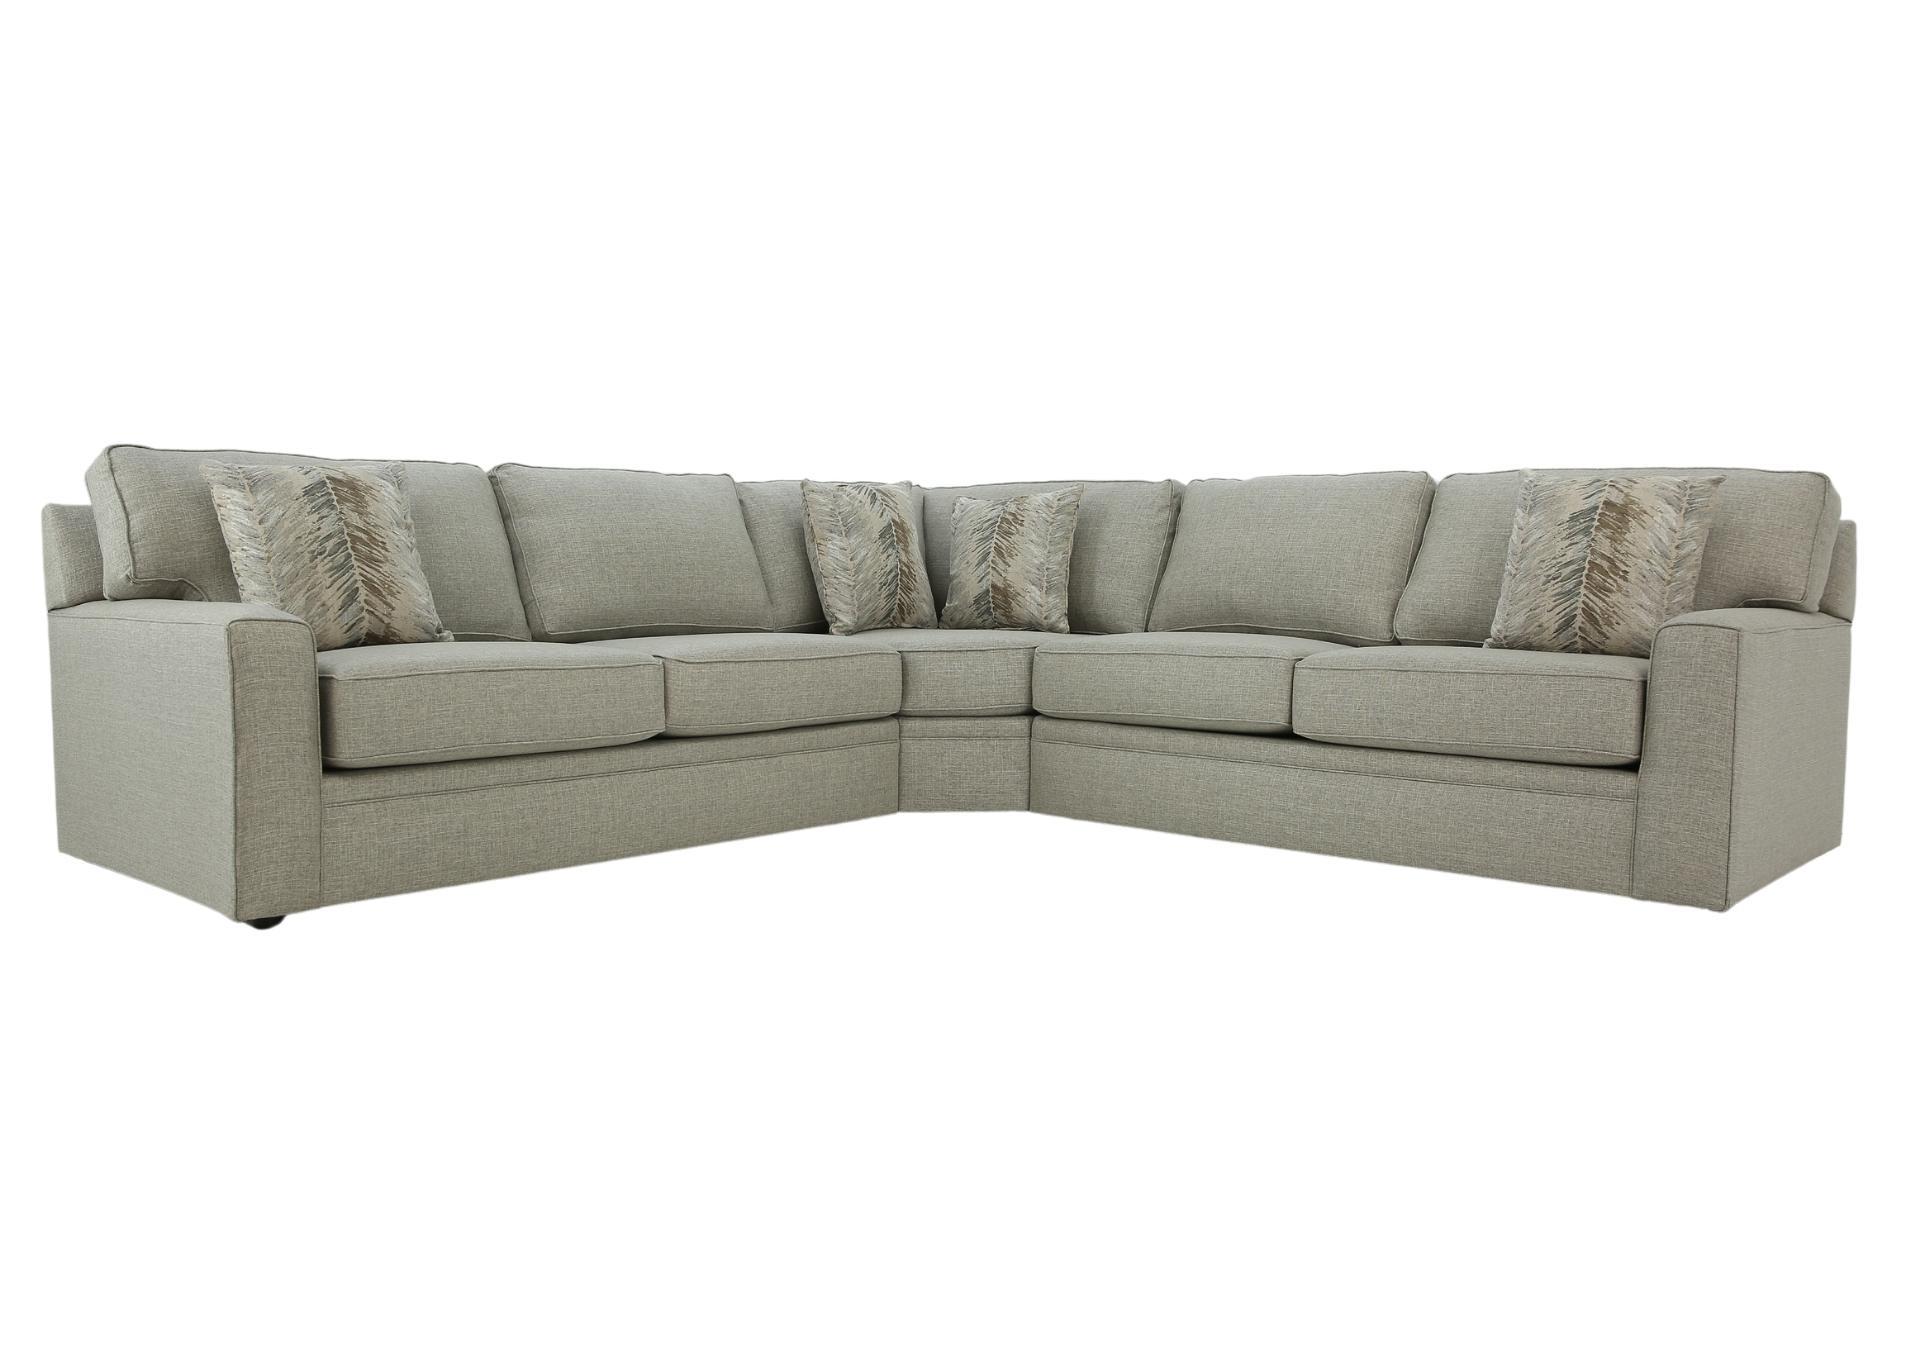 PENELOPE 3 PIECE SECTIONAL